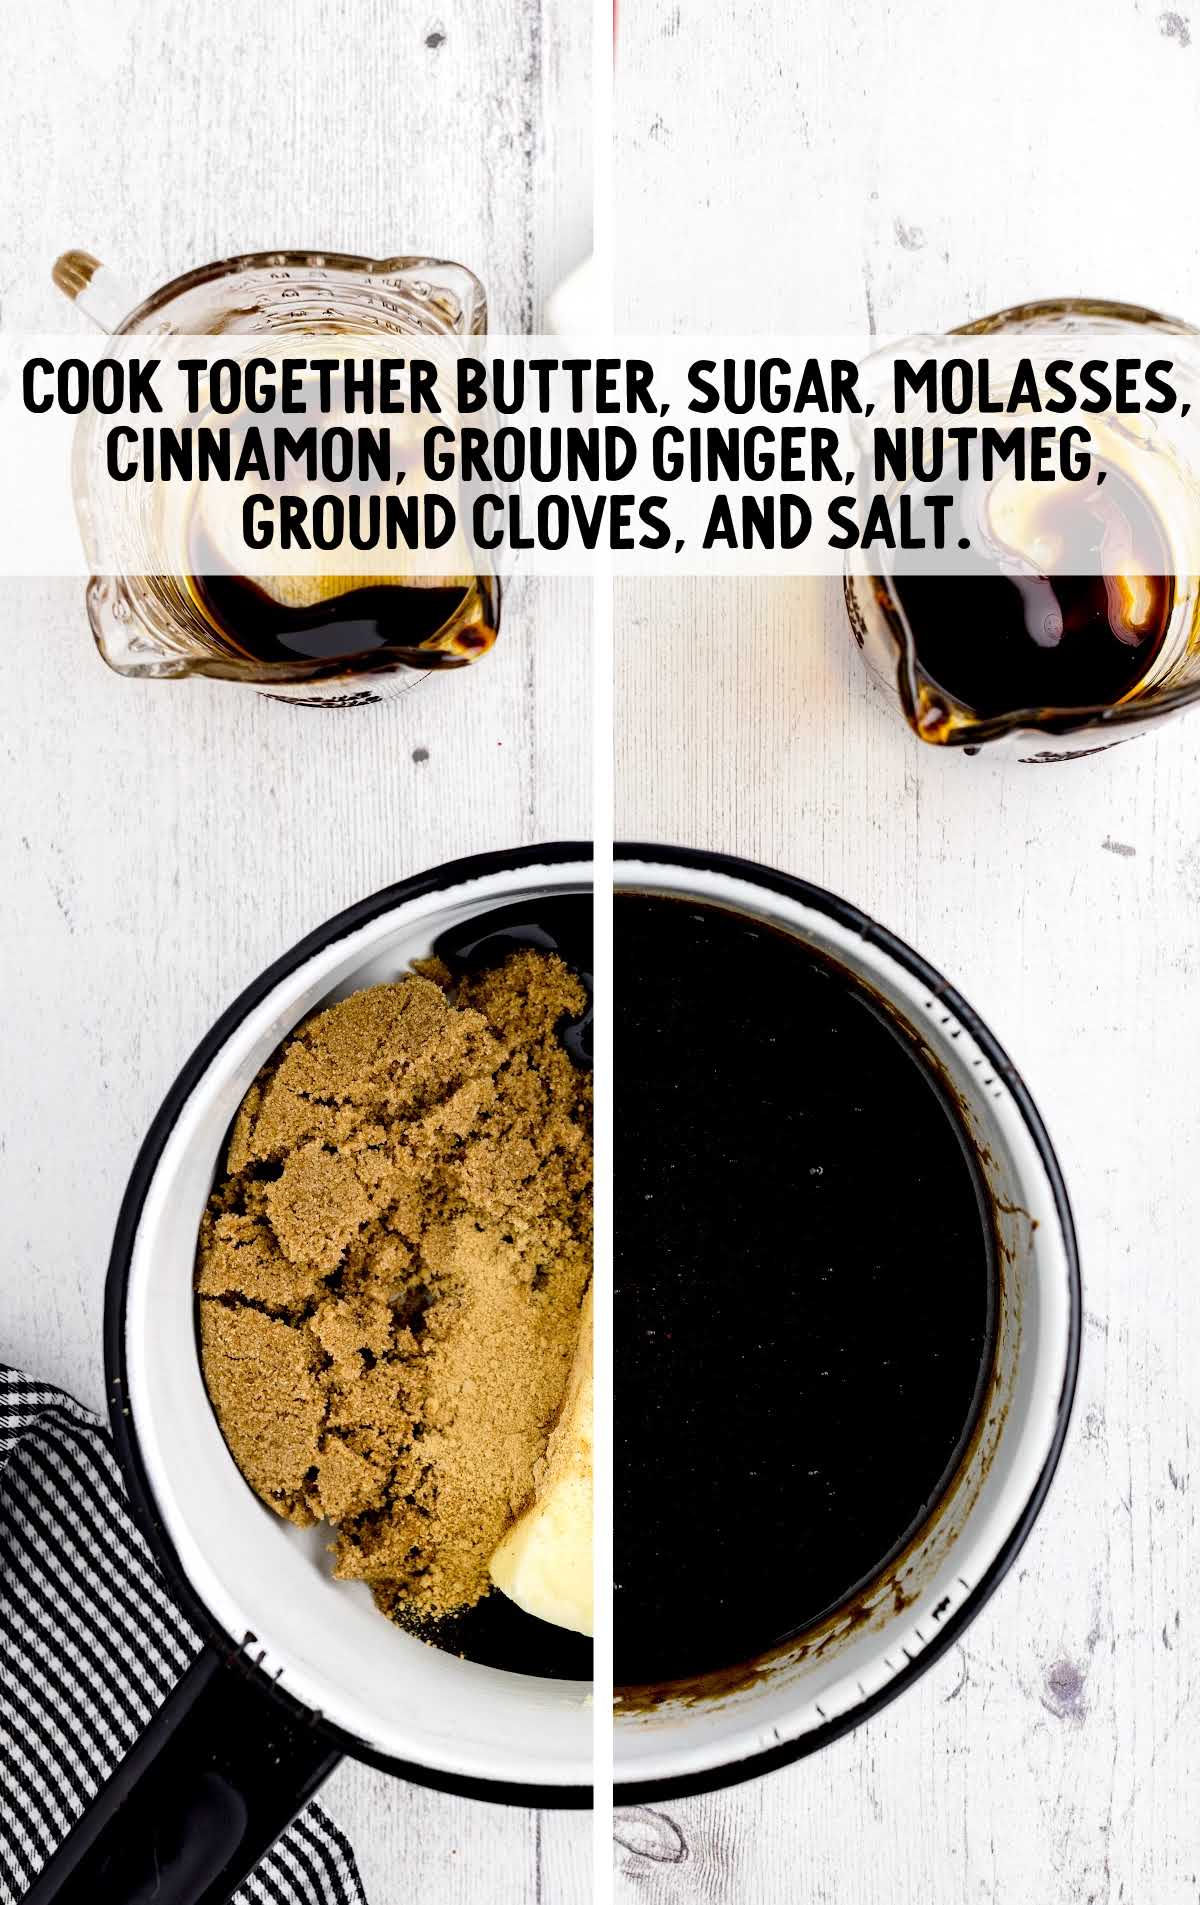 butter, sugar, molasses, cinnamon, ground ginger, nutmeg, ground cloves, salt cooked together in a bowl